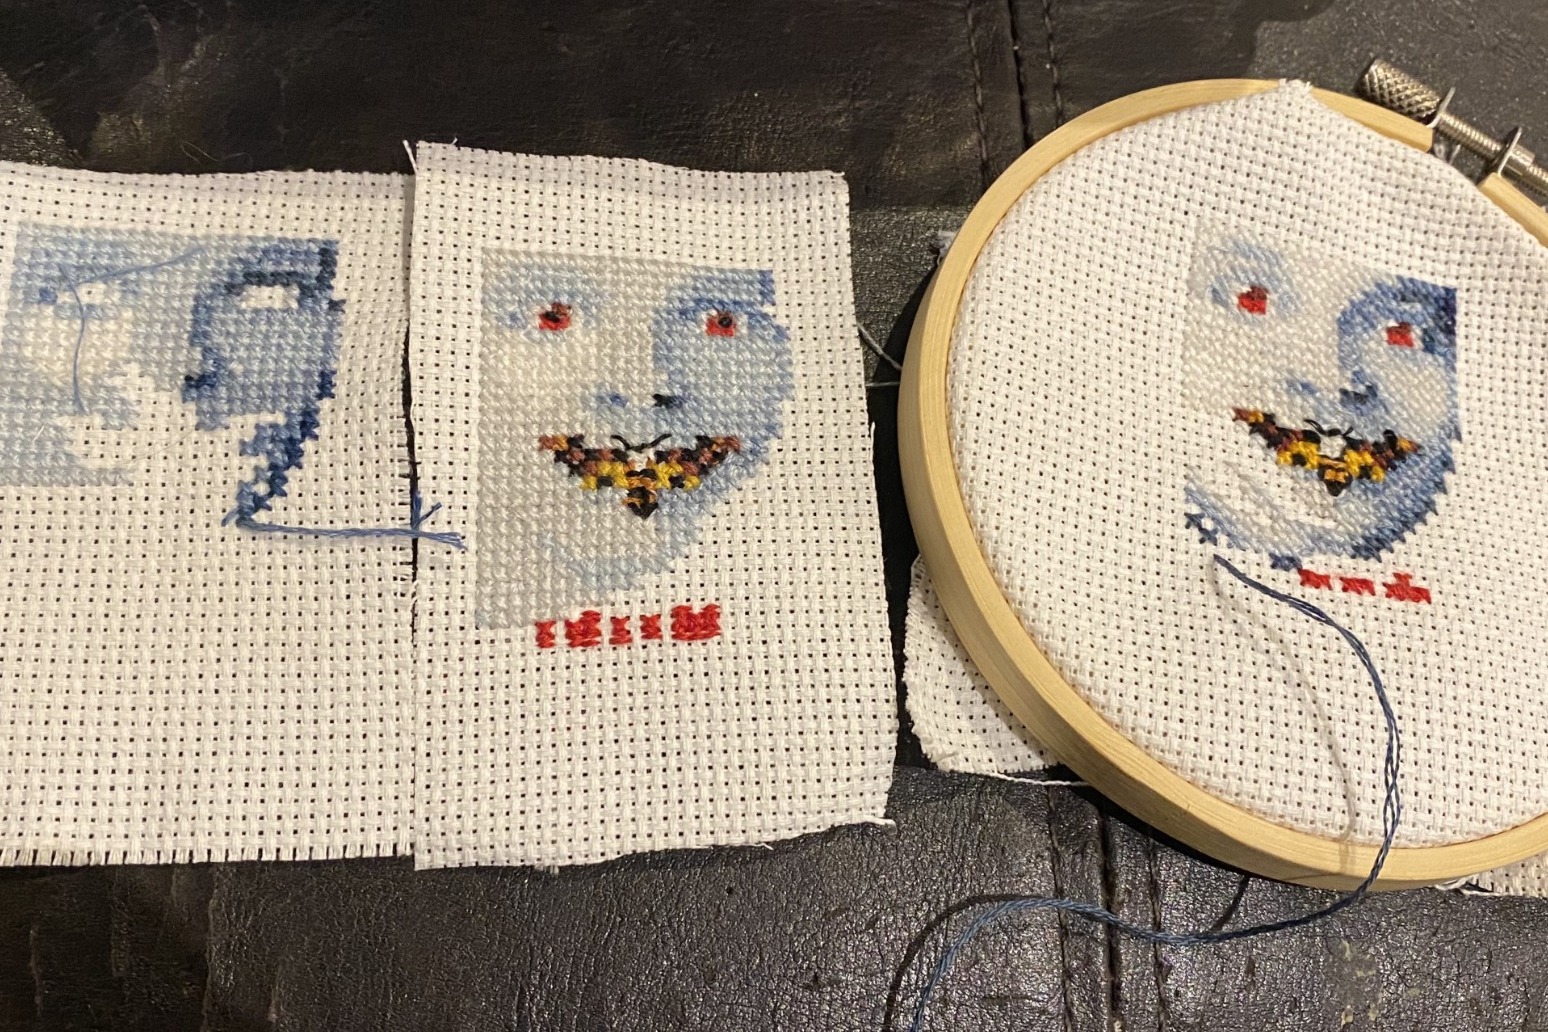 Self-professed ‘movie buff’ makes her mark with mini cross-stitch film posters 